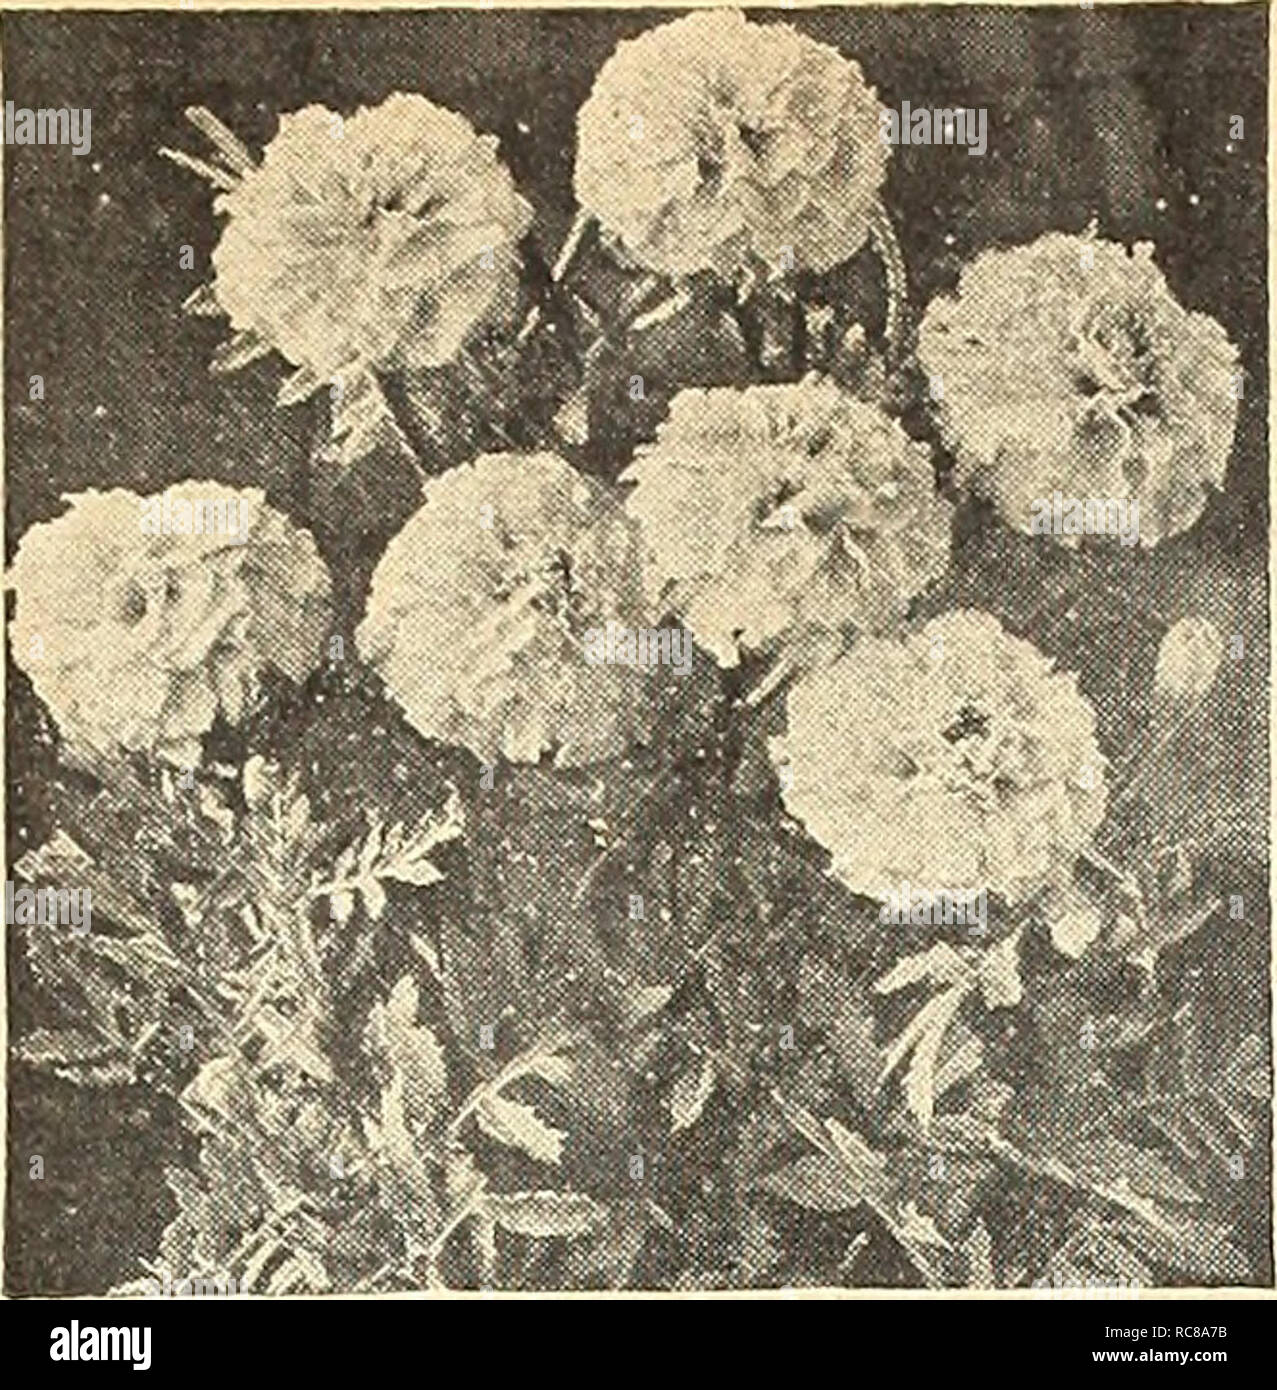 . Dreer's garden book for 1943. Seeds Catalogs; Nursery stock Catalogs; Gardening Equipment and supplies Catalogs; Flowers Seeds Catalogs; Vegetables Seeds Catalogs; Fruit Seeds Catalogs. Petunia Amcii&lt;-.i Alldouble. Mangold Sunkist ^5 &quot;''^â p 'gfete^ â â¢ i Petunia gloo , All America Selections for 1943 Silver Medal Awards Petunia Â© 3412 America Alldouble Distinctly different from all other double Petunias, â lOO^o true for doubleness. This is the first ot the &quot;All- double Petunias&quot; originated in this country to be offered to American gar- deners. The plants branch freely  Stock Photo